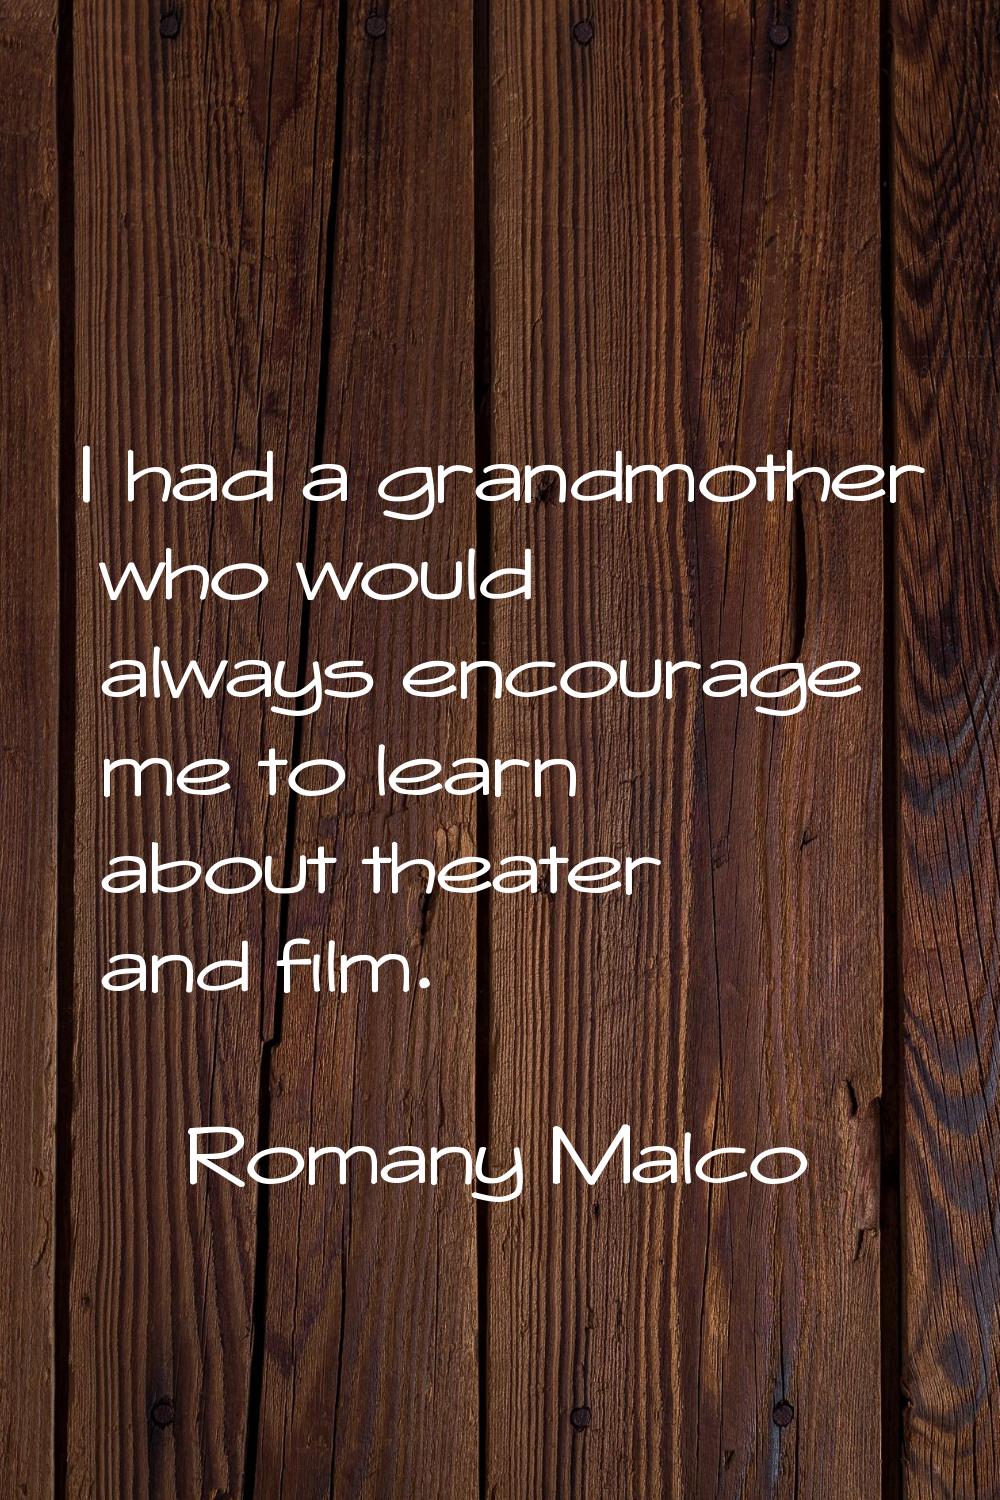 I had a grandmother who would always encourage me to learn about theater and film.